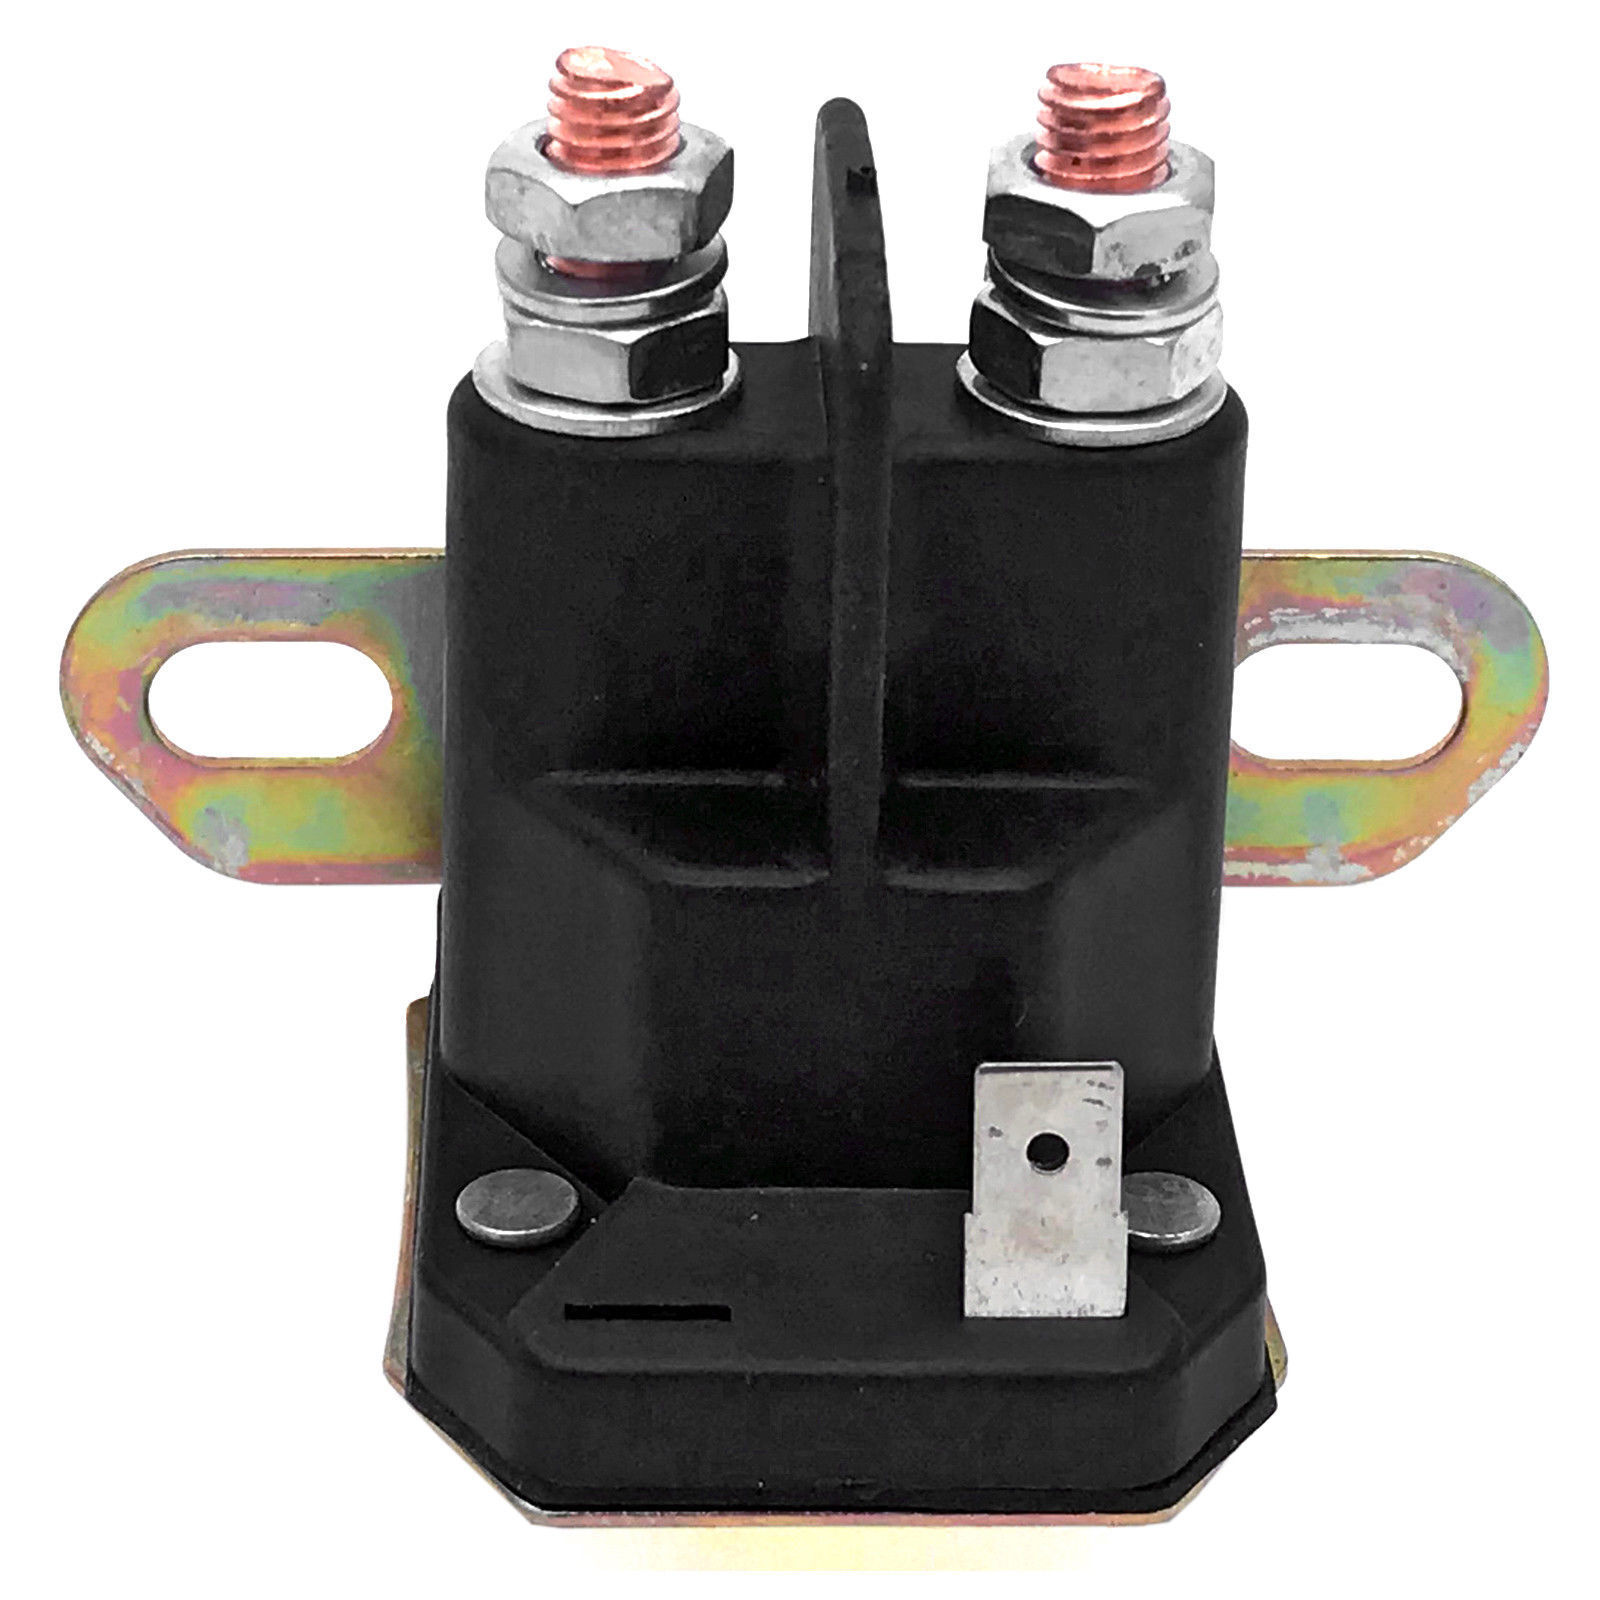 Solenoid Relay Switch for Trombetta 812-1211-211 812-1201-211 93265-19 93265-1WR